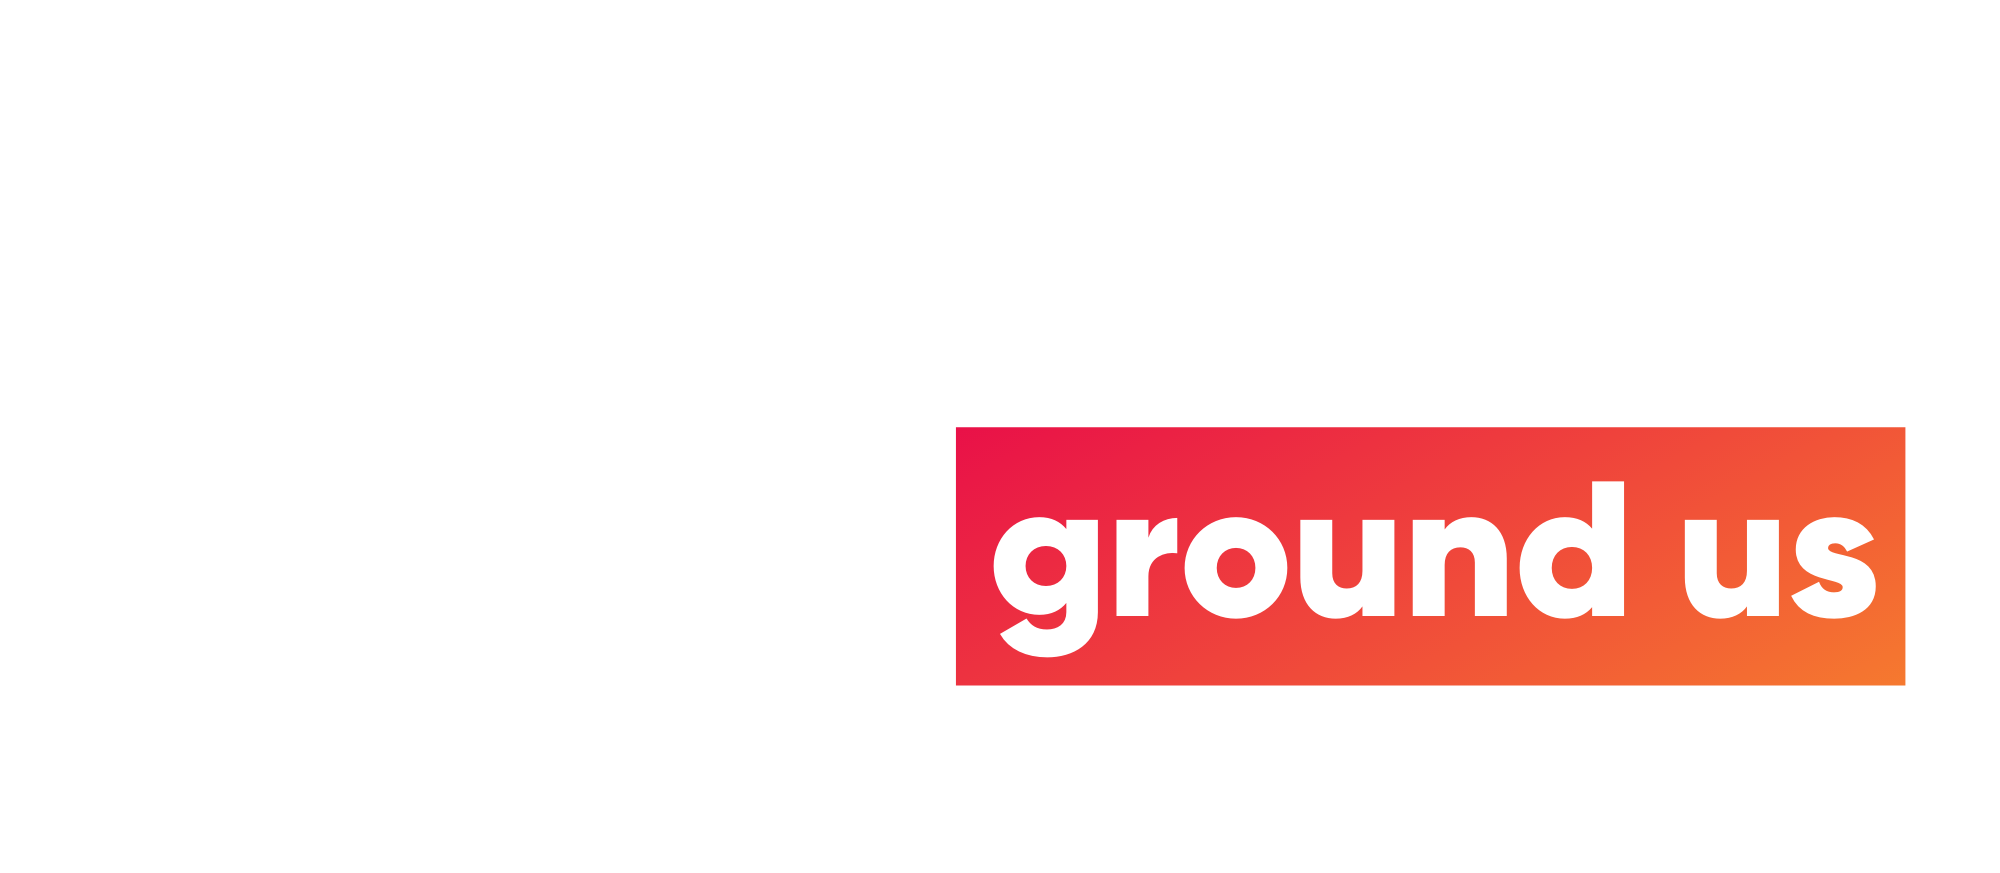 Our principles that ground us